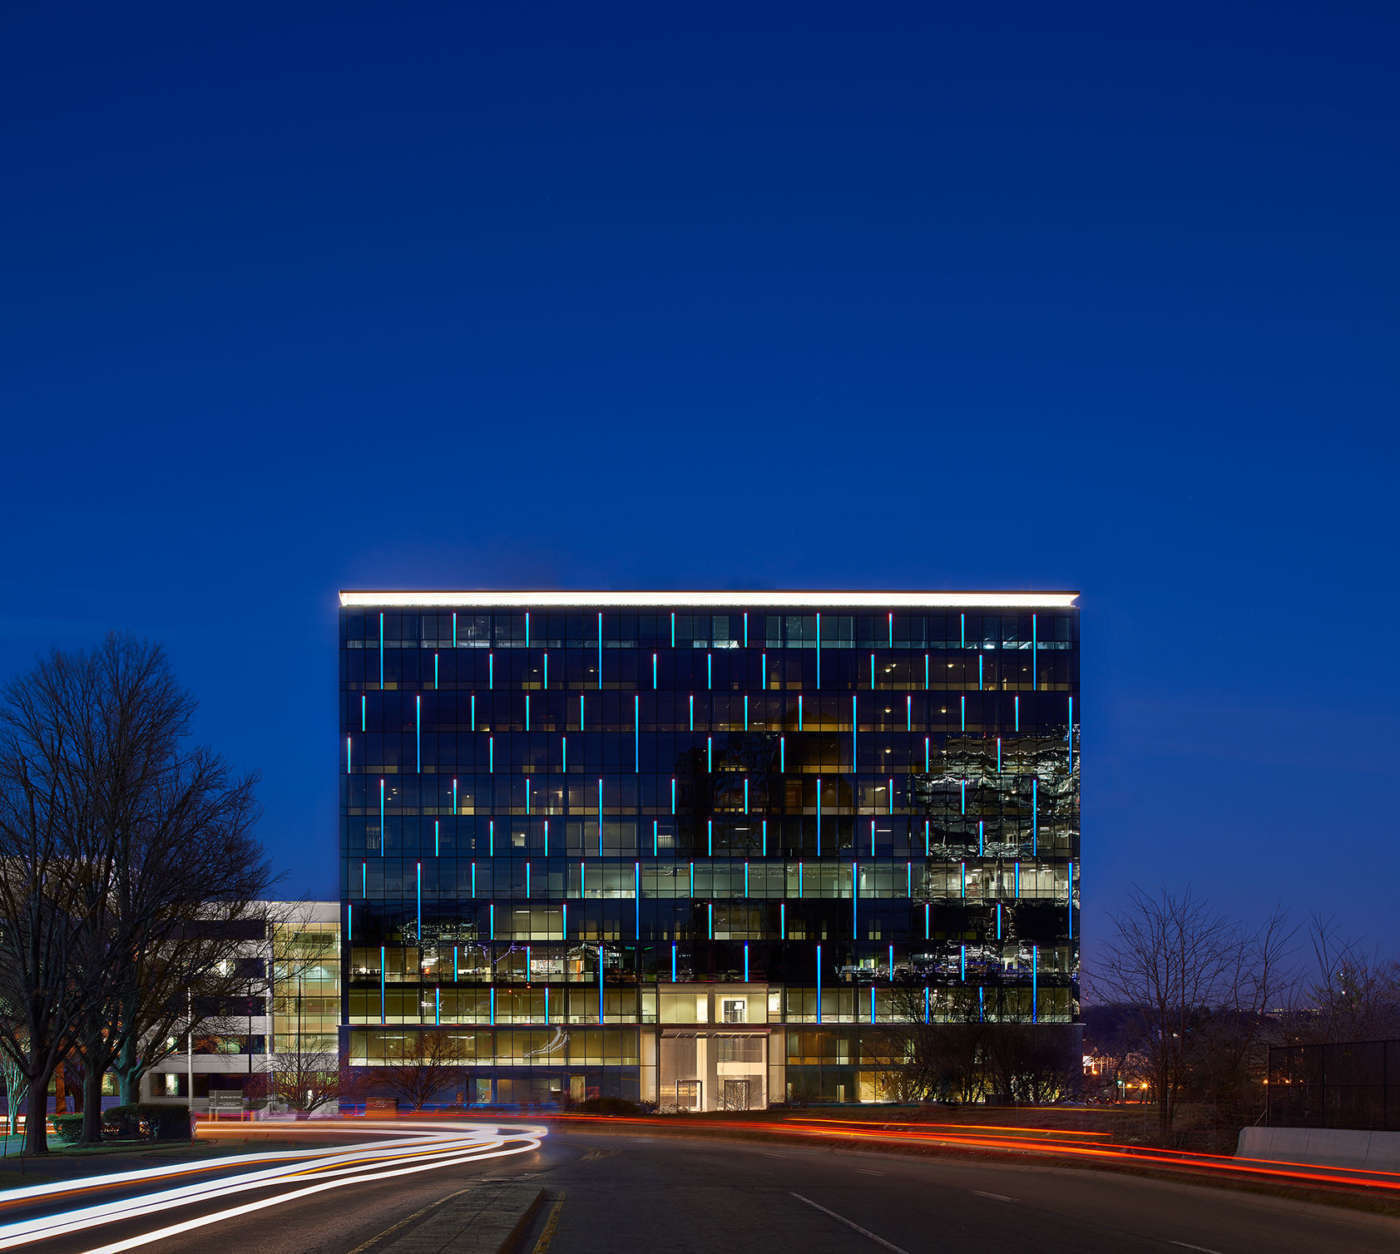 Located at 7900 Westpark Drive, the Silverline Center is an office building complete with daycare facilities, a fitness center, golf simulator, restaurant and coffee shop all on site. (Courtesy Fairfax County Economic Development Authority)